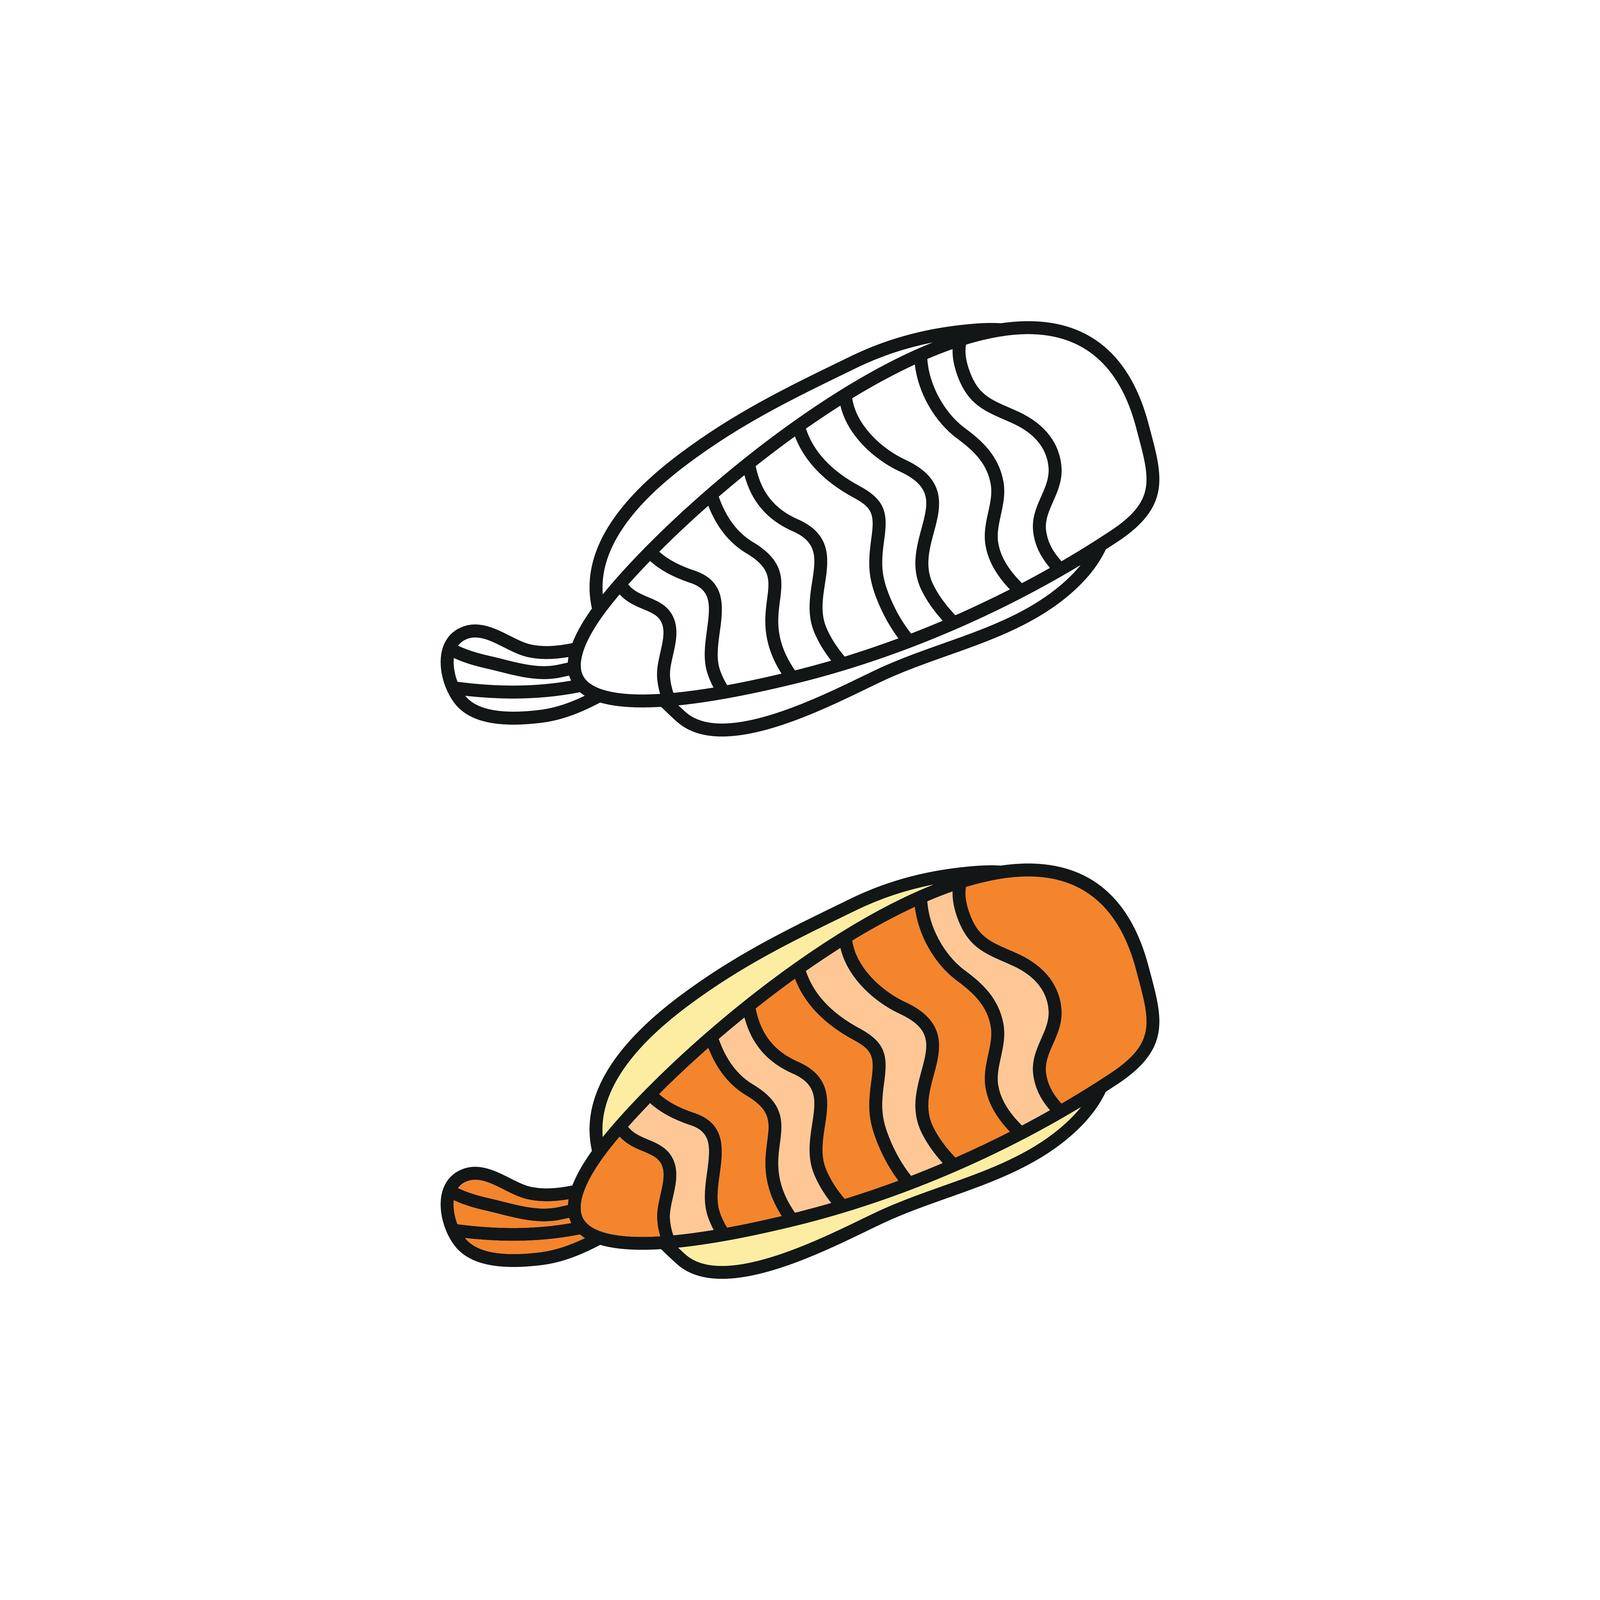 Doodle colored and outline ebi sushi with shrimp isolated on white background.